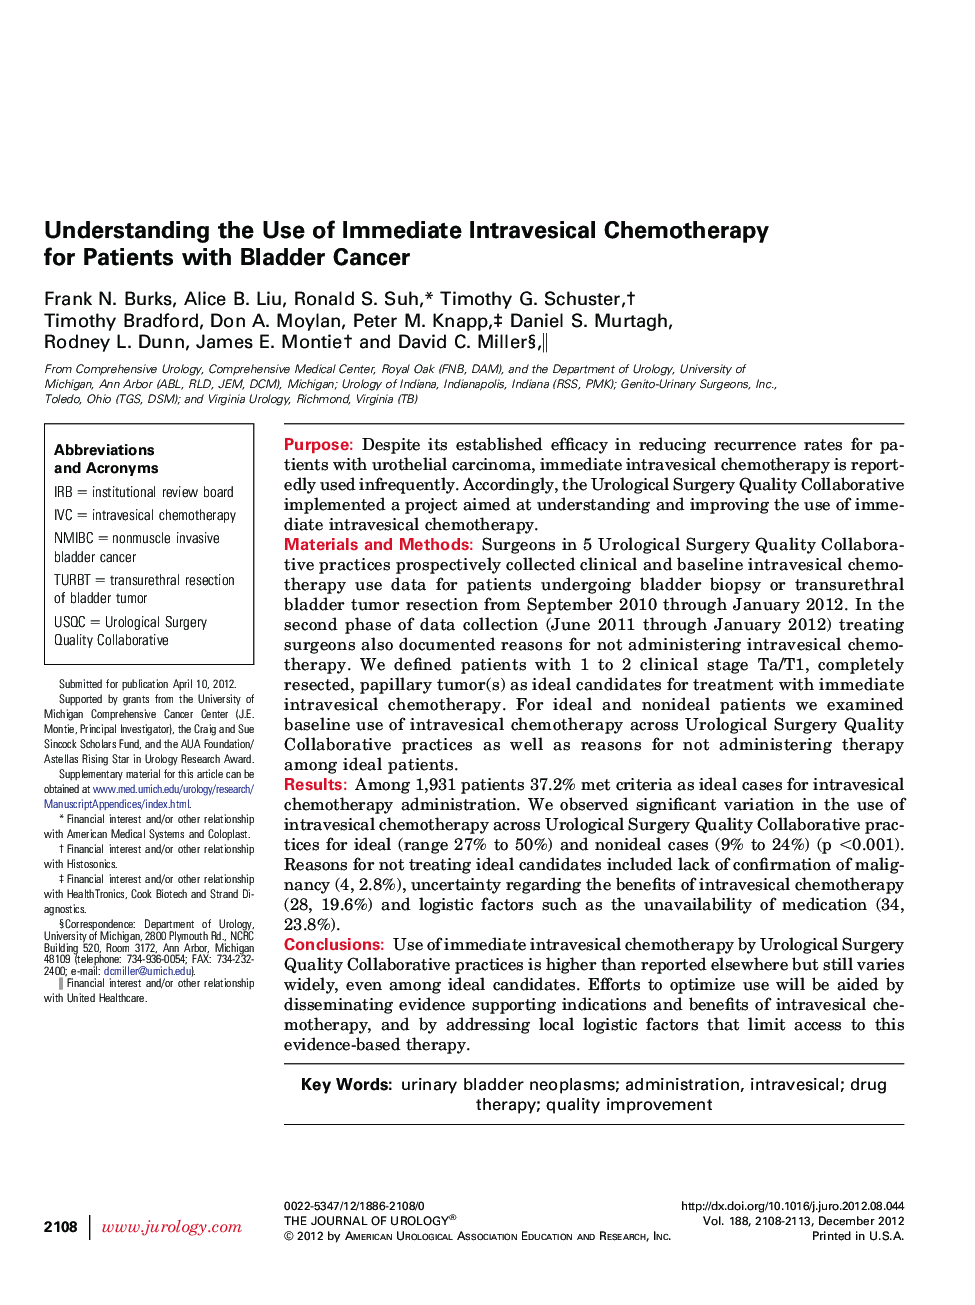 Understanding the Use of Immediate Intravesical Chemotherapy for Patients with Bladder Cancer